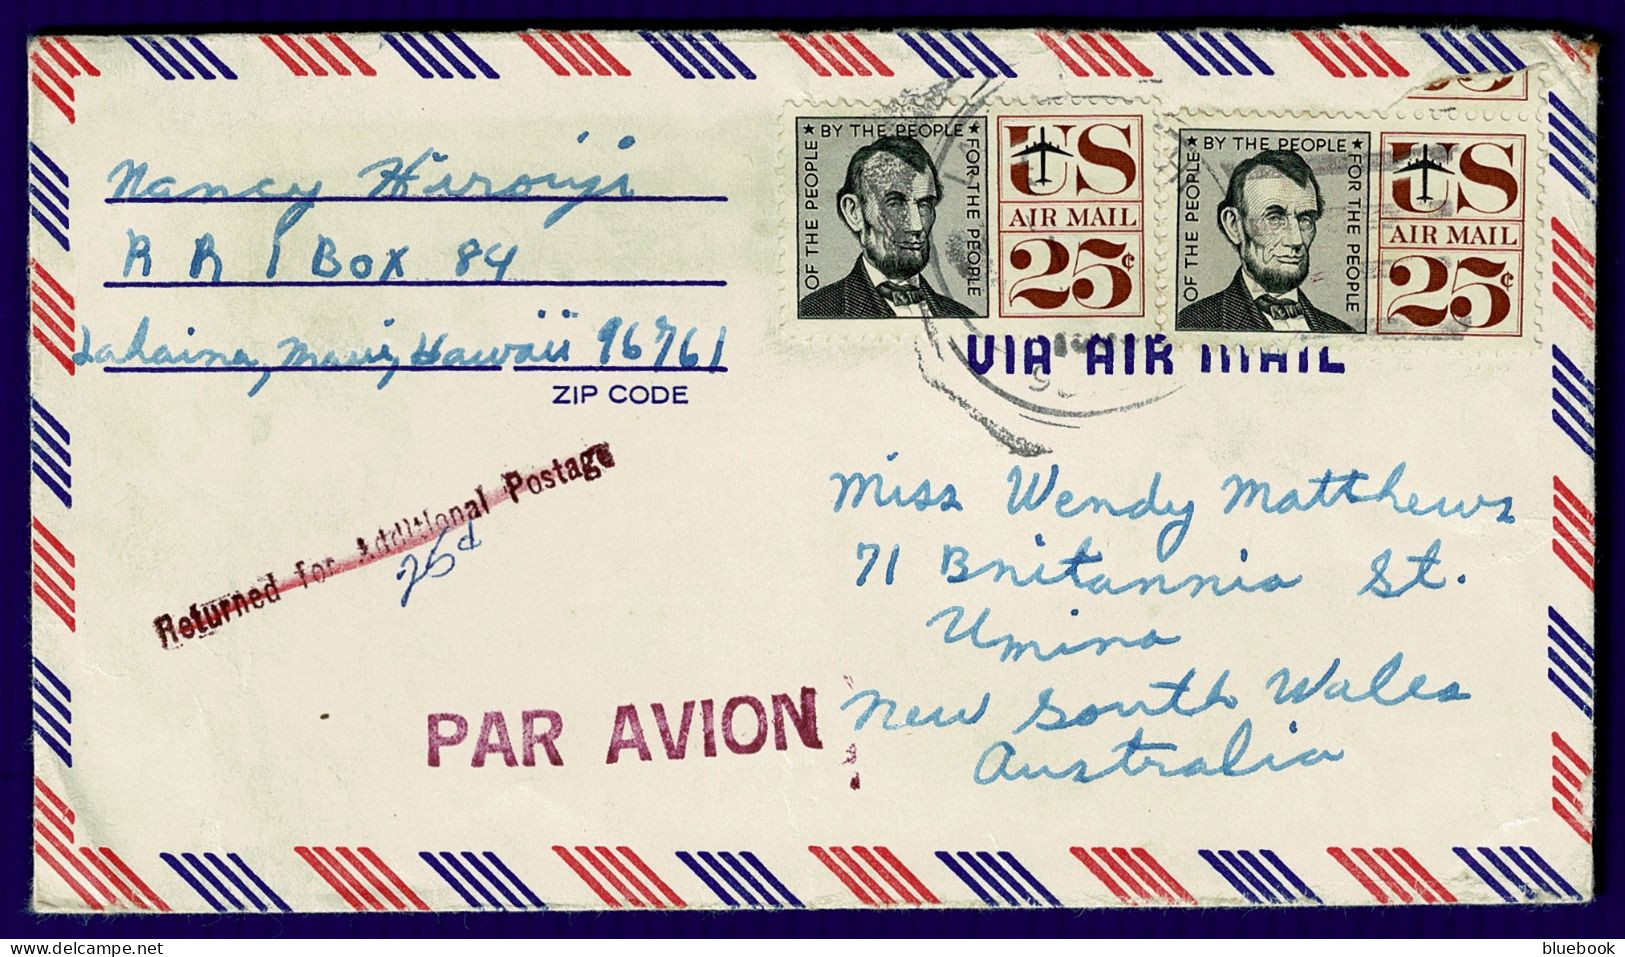 Ref 1648 - 1960's Airmail Cover Lahaina Hawaii USA To Australia - 50c Rate? Insufficient Postage Instructional Mark - Hawaï